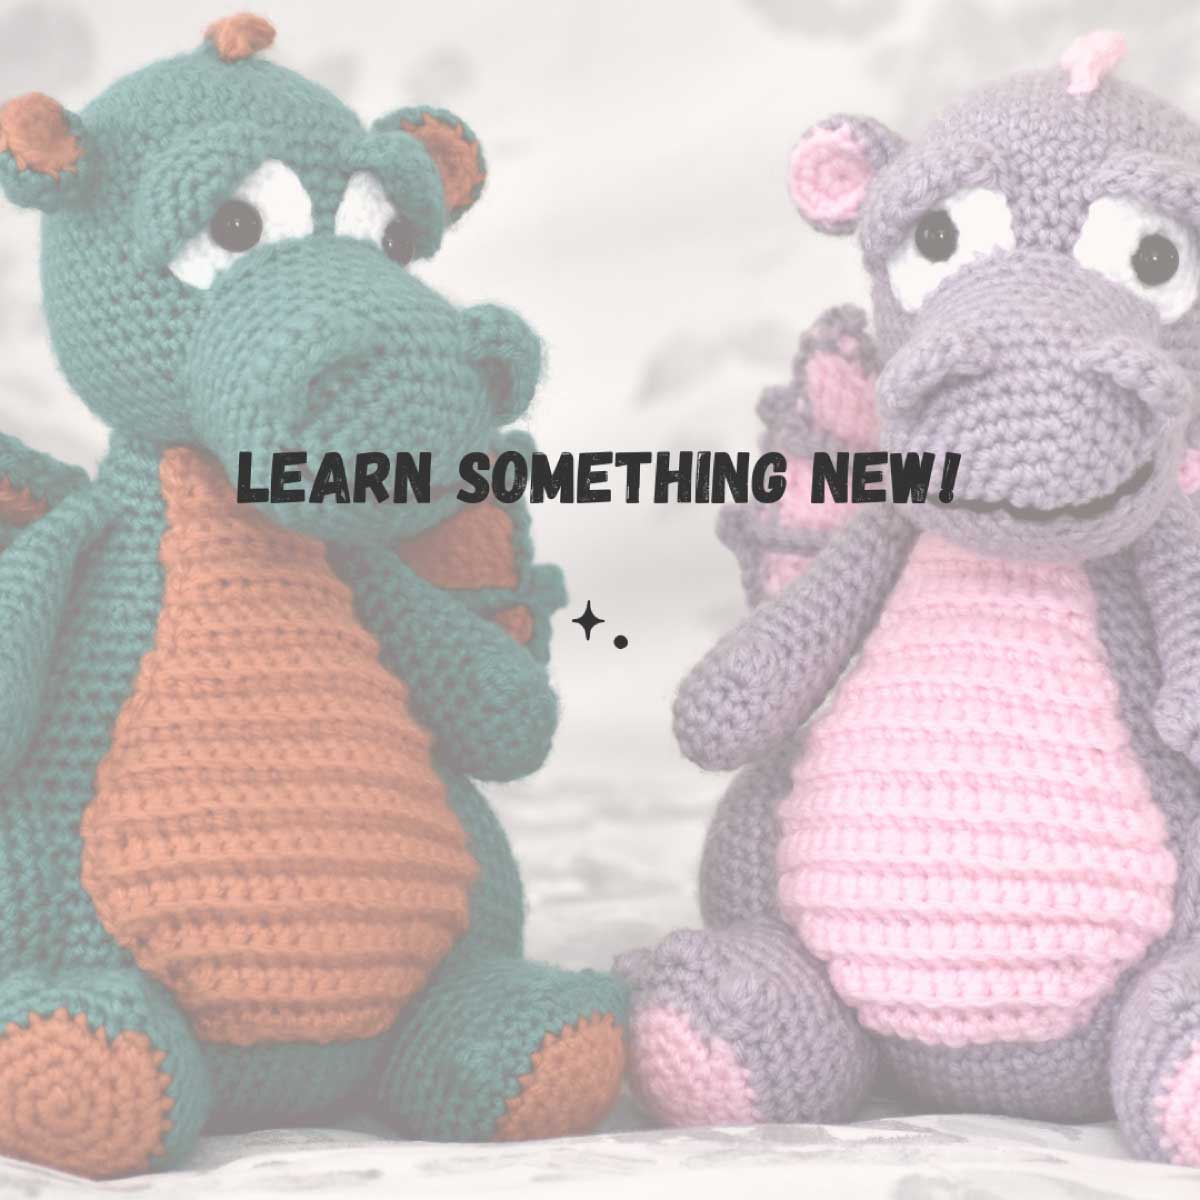 Learn something new! 2 crochet dragons on a bed to show a hobby.